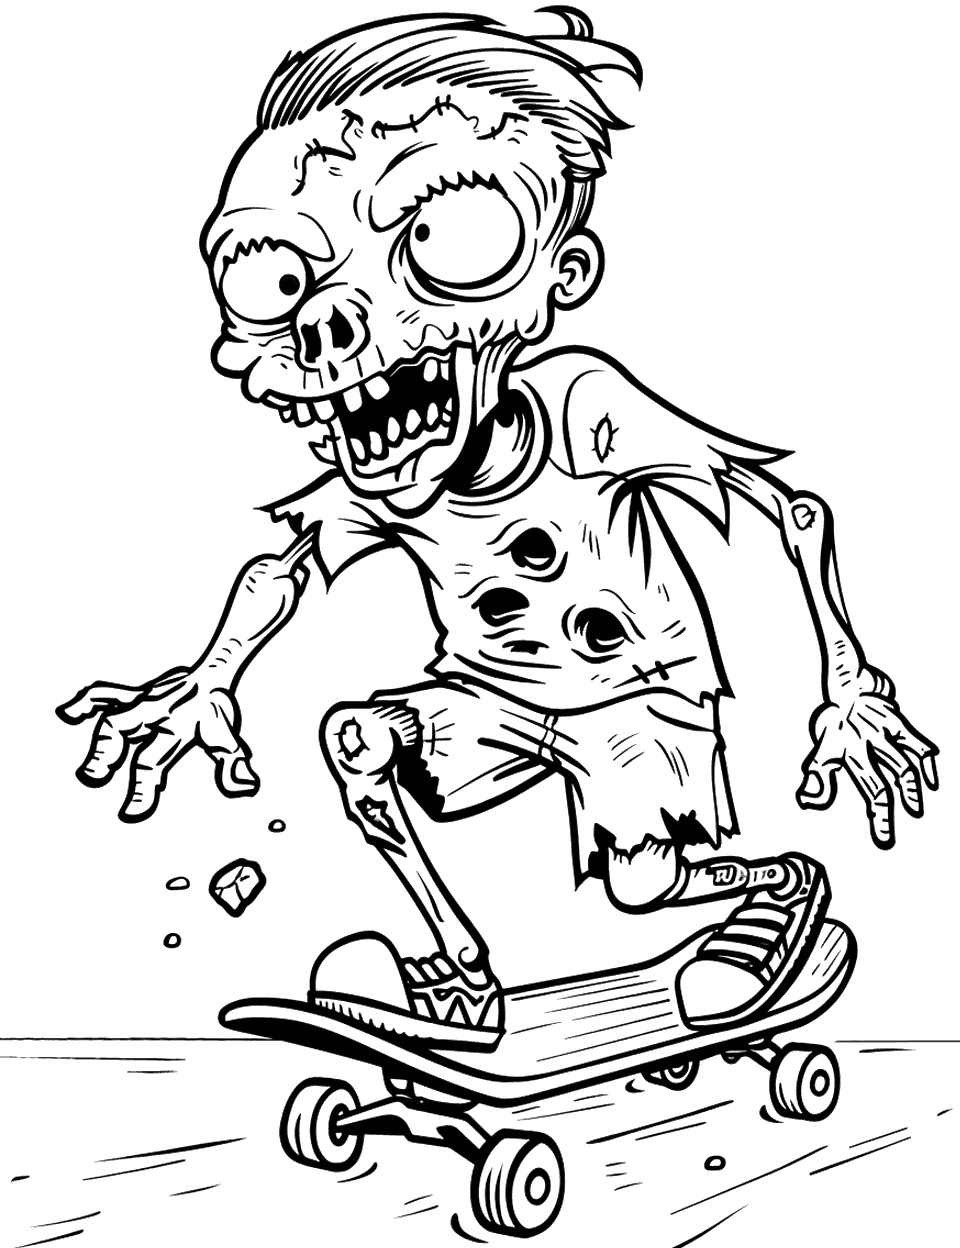 Cool Zombie Skateboarder Coloring Page - A zombie riding a skateboard.